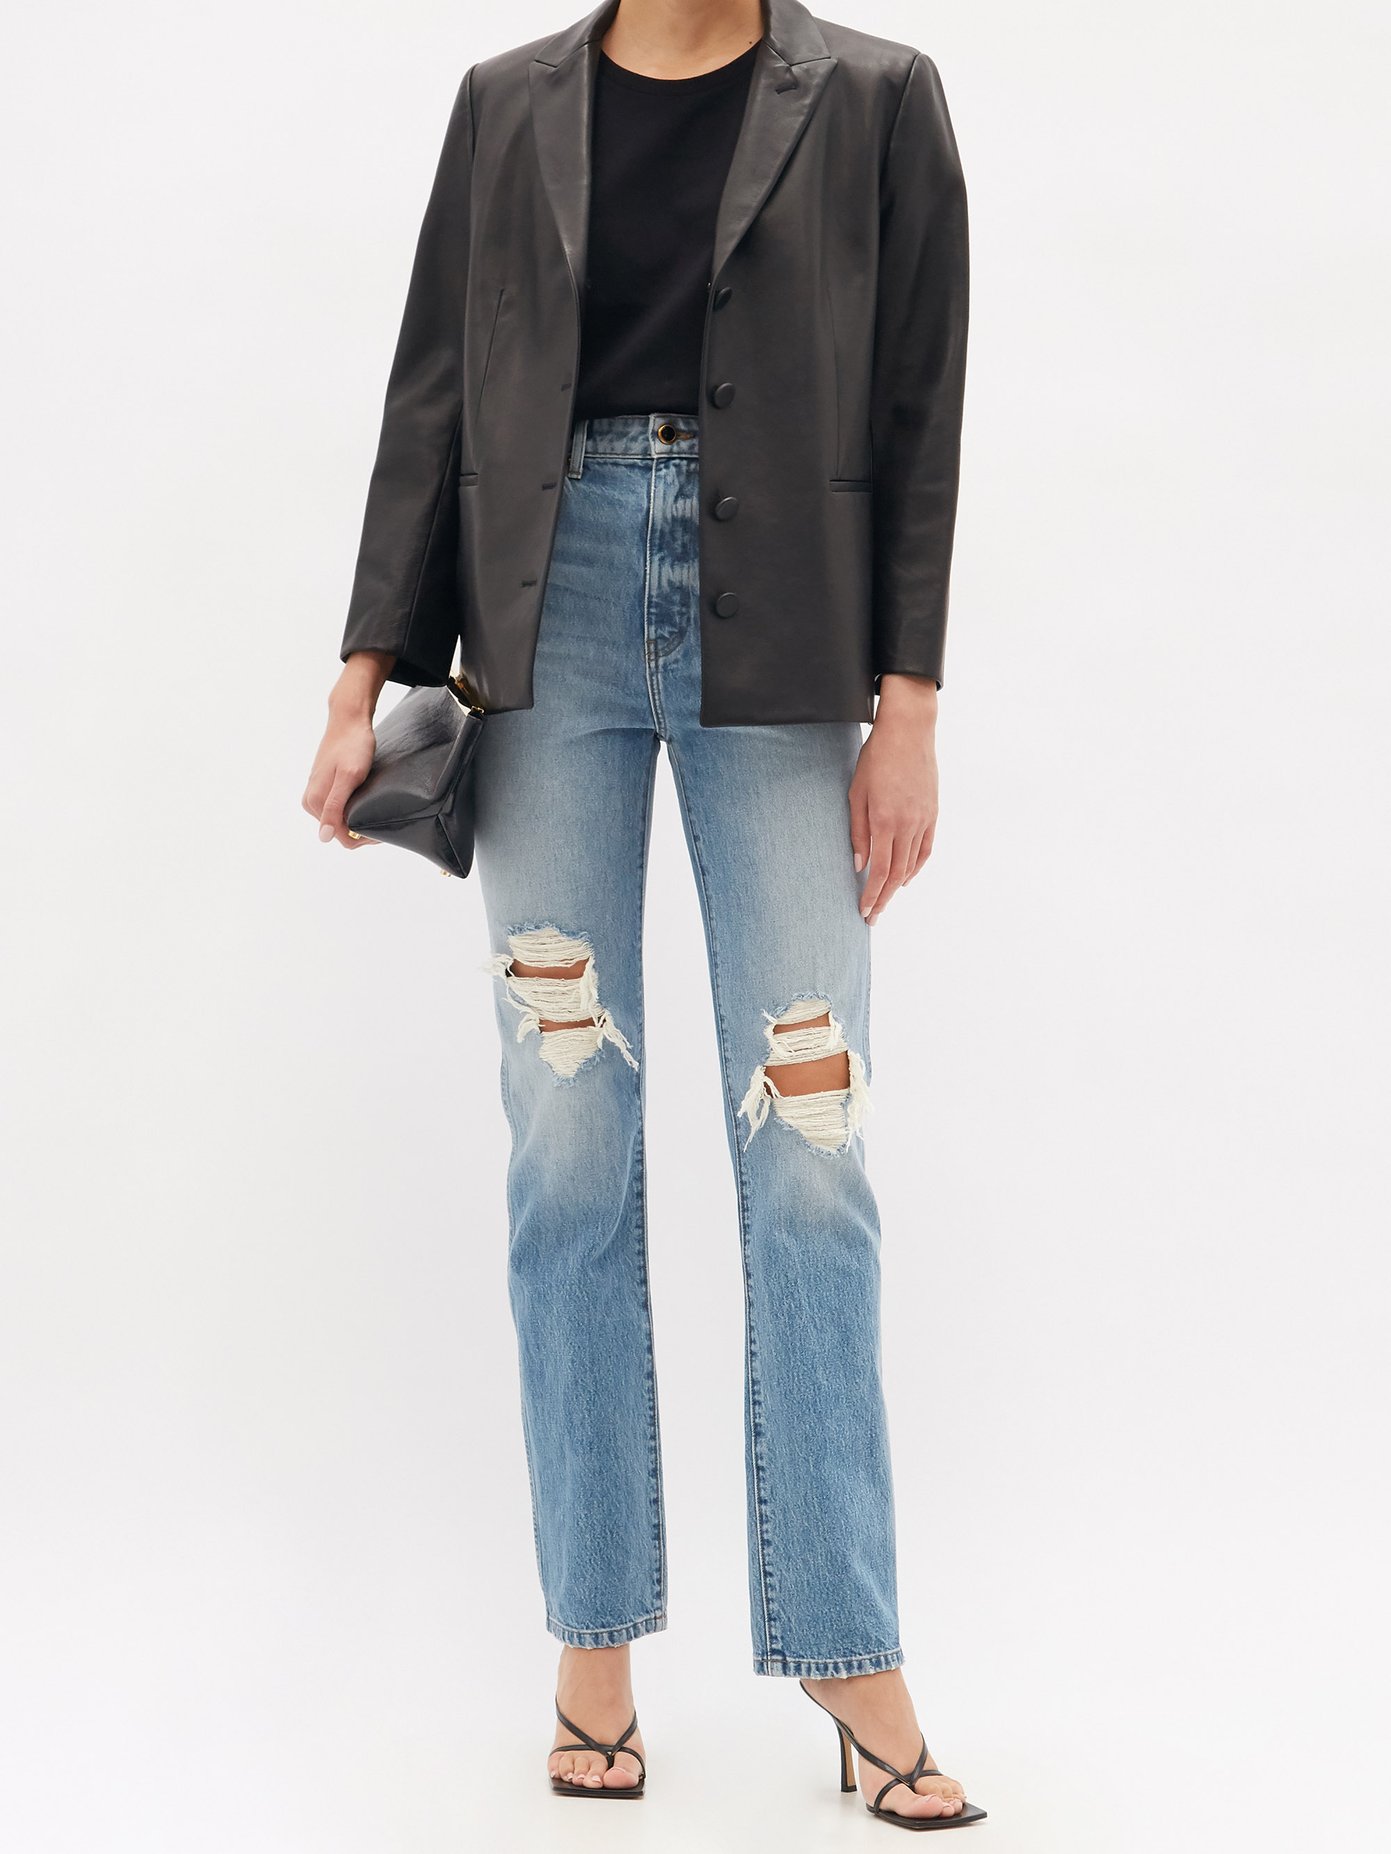 https://assetsprx.matchesfashion.com/img/product/outfit_1411629_1_zoom.jpg